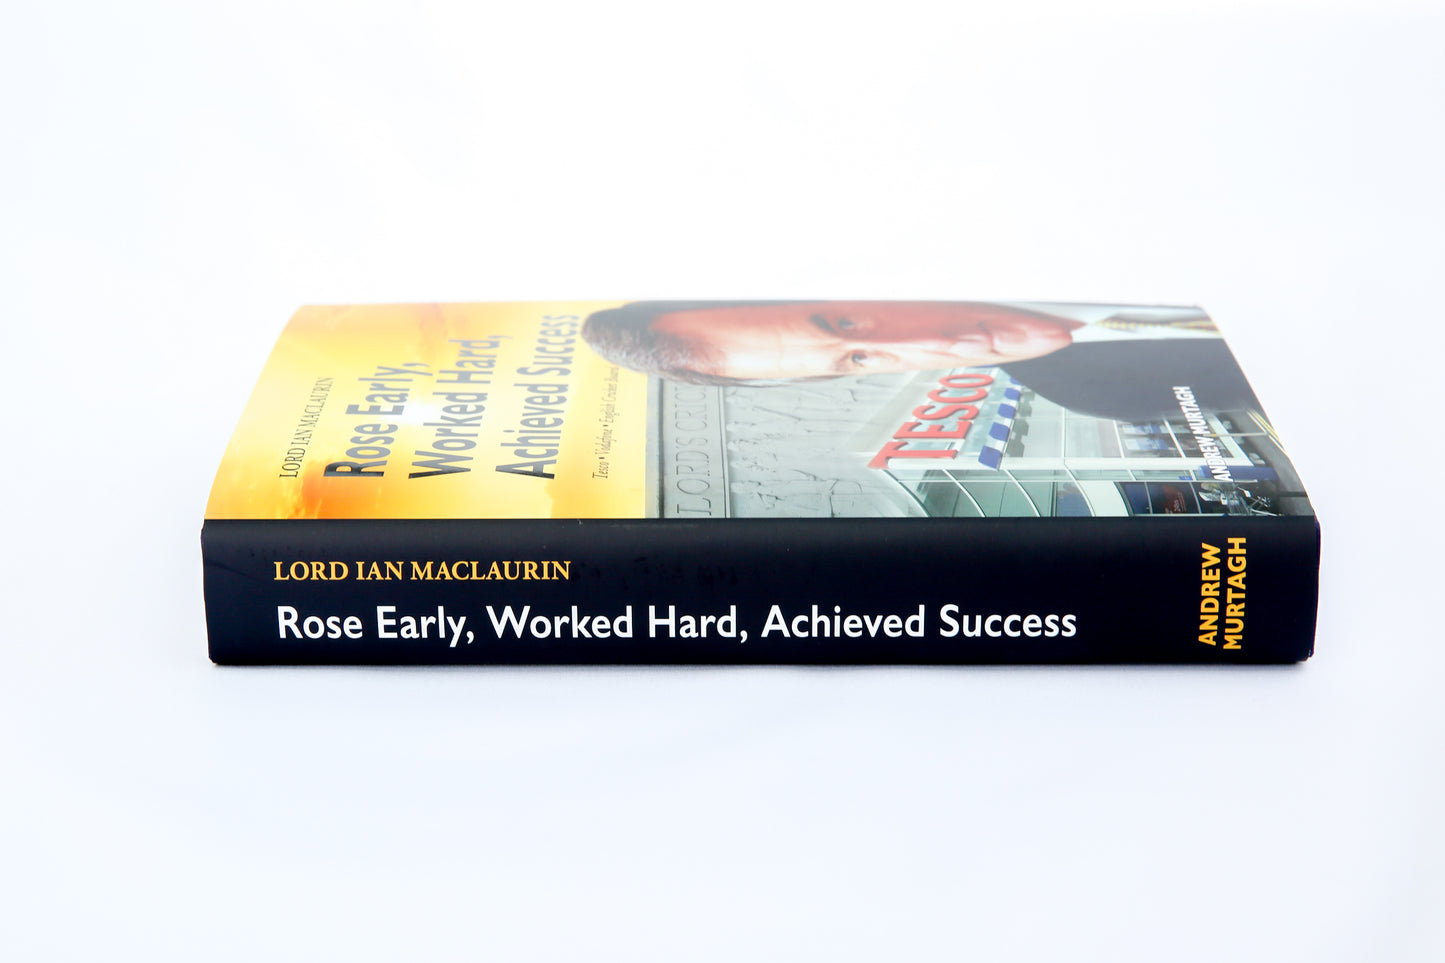 Rose Early, Worked Hard, Achieved Success by Lord Ian MacLaurin